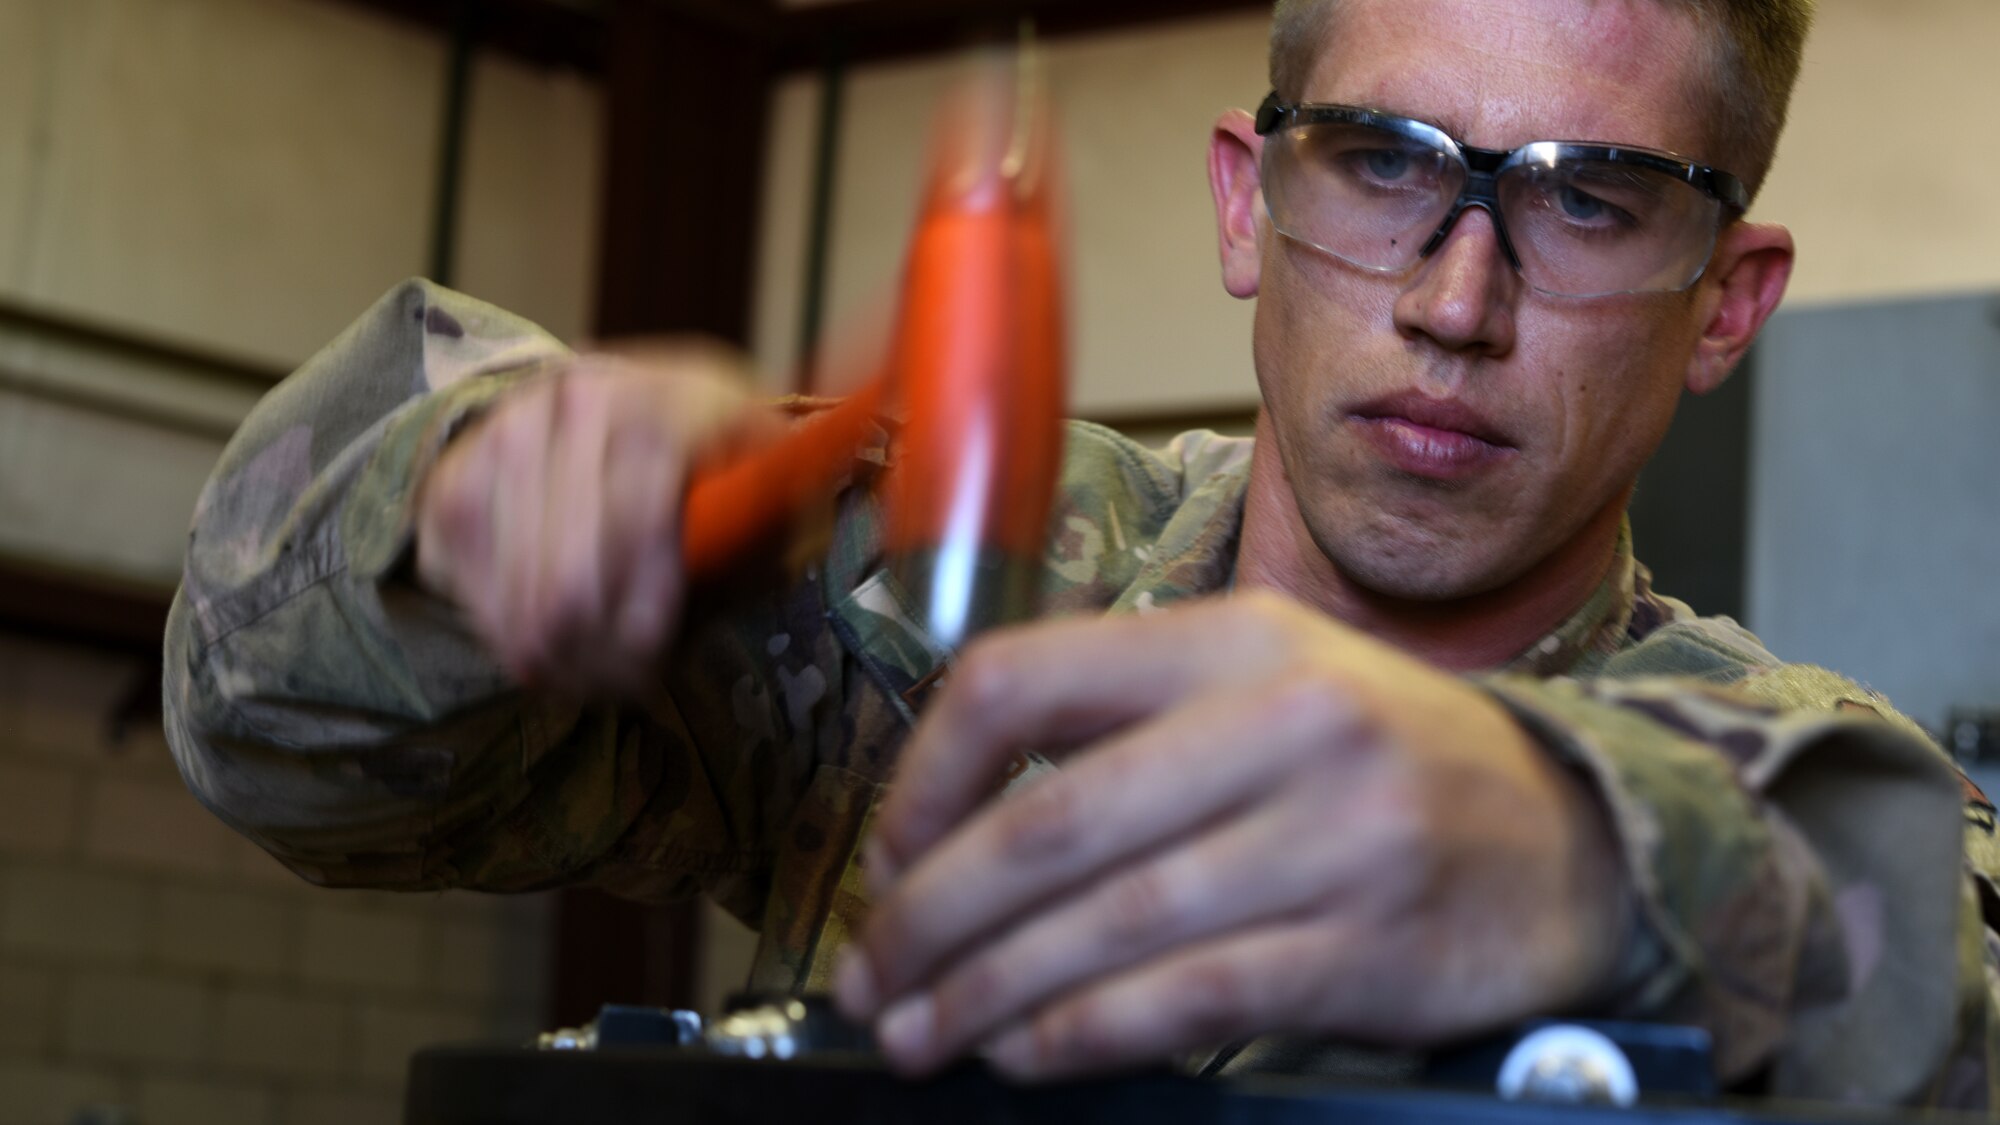 A photo of Airman working at a wheel and tire shop.